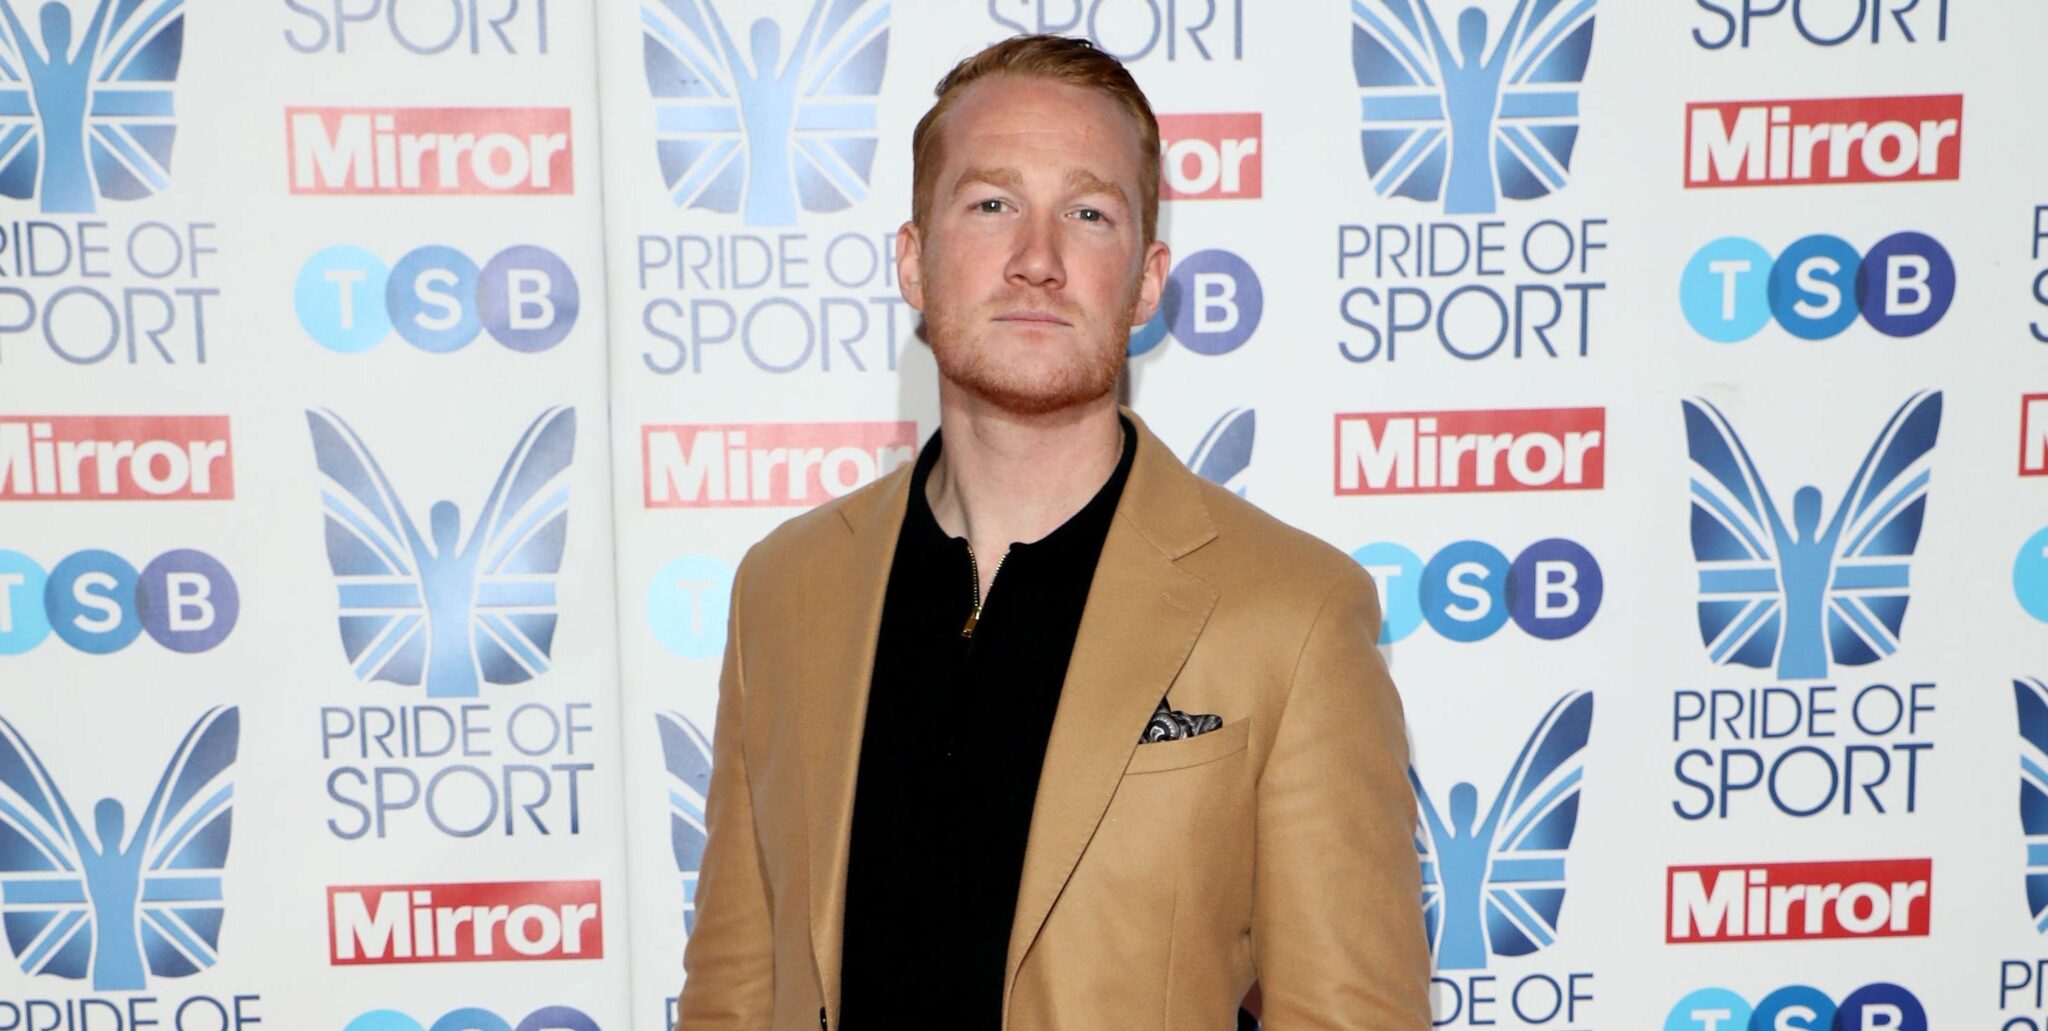 Greg rutherford